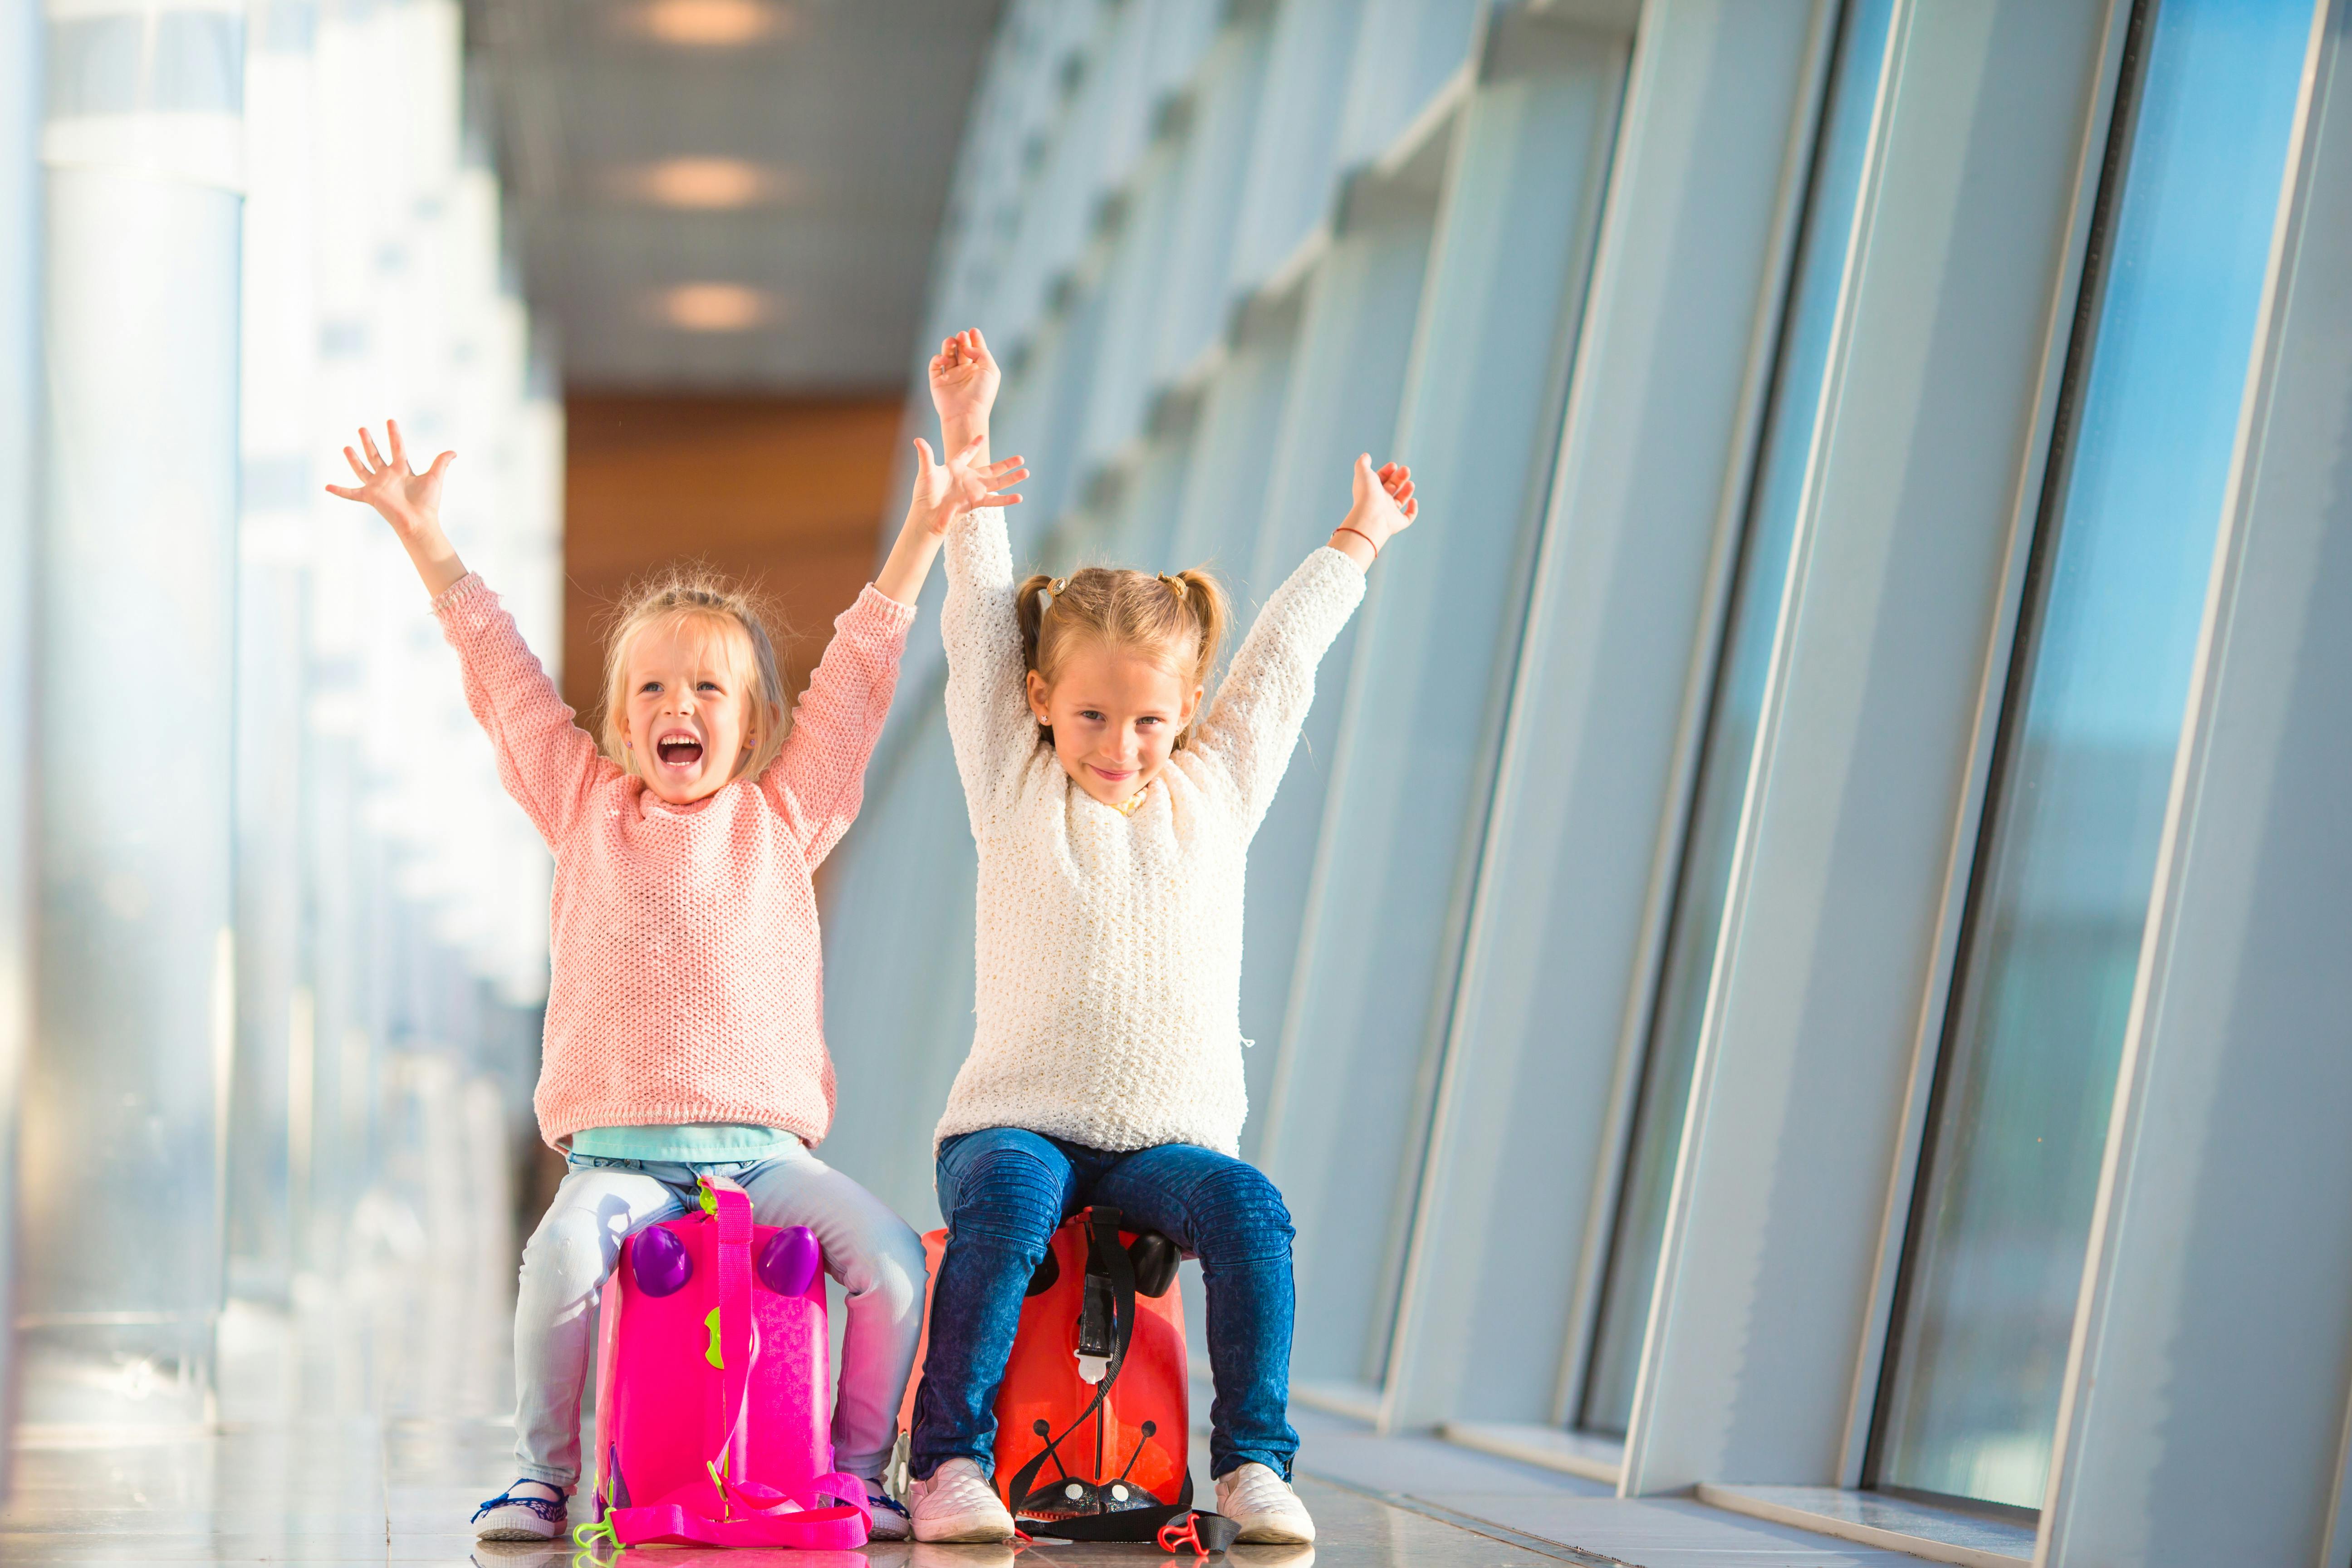 Kids using a ride-on luggage at an airport